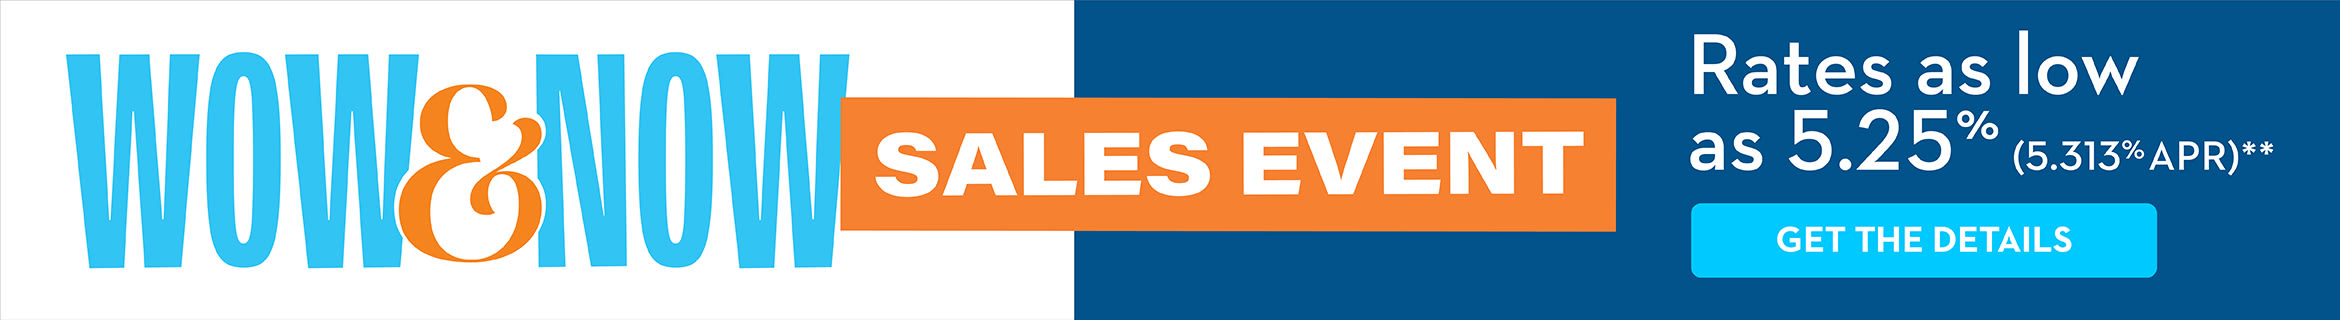 WOW & NOW SALES EVENT Rates as low as 5.25% (5.313% APR)** GET THE DETAILS